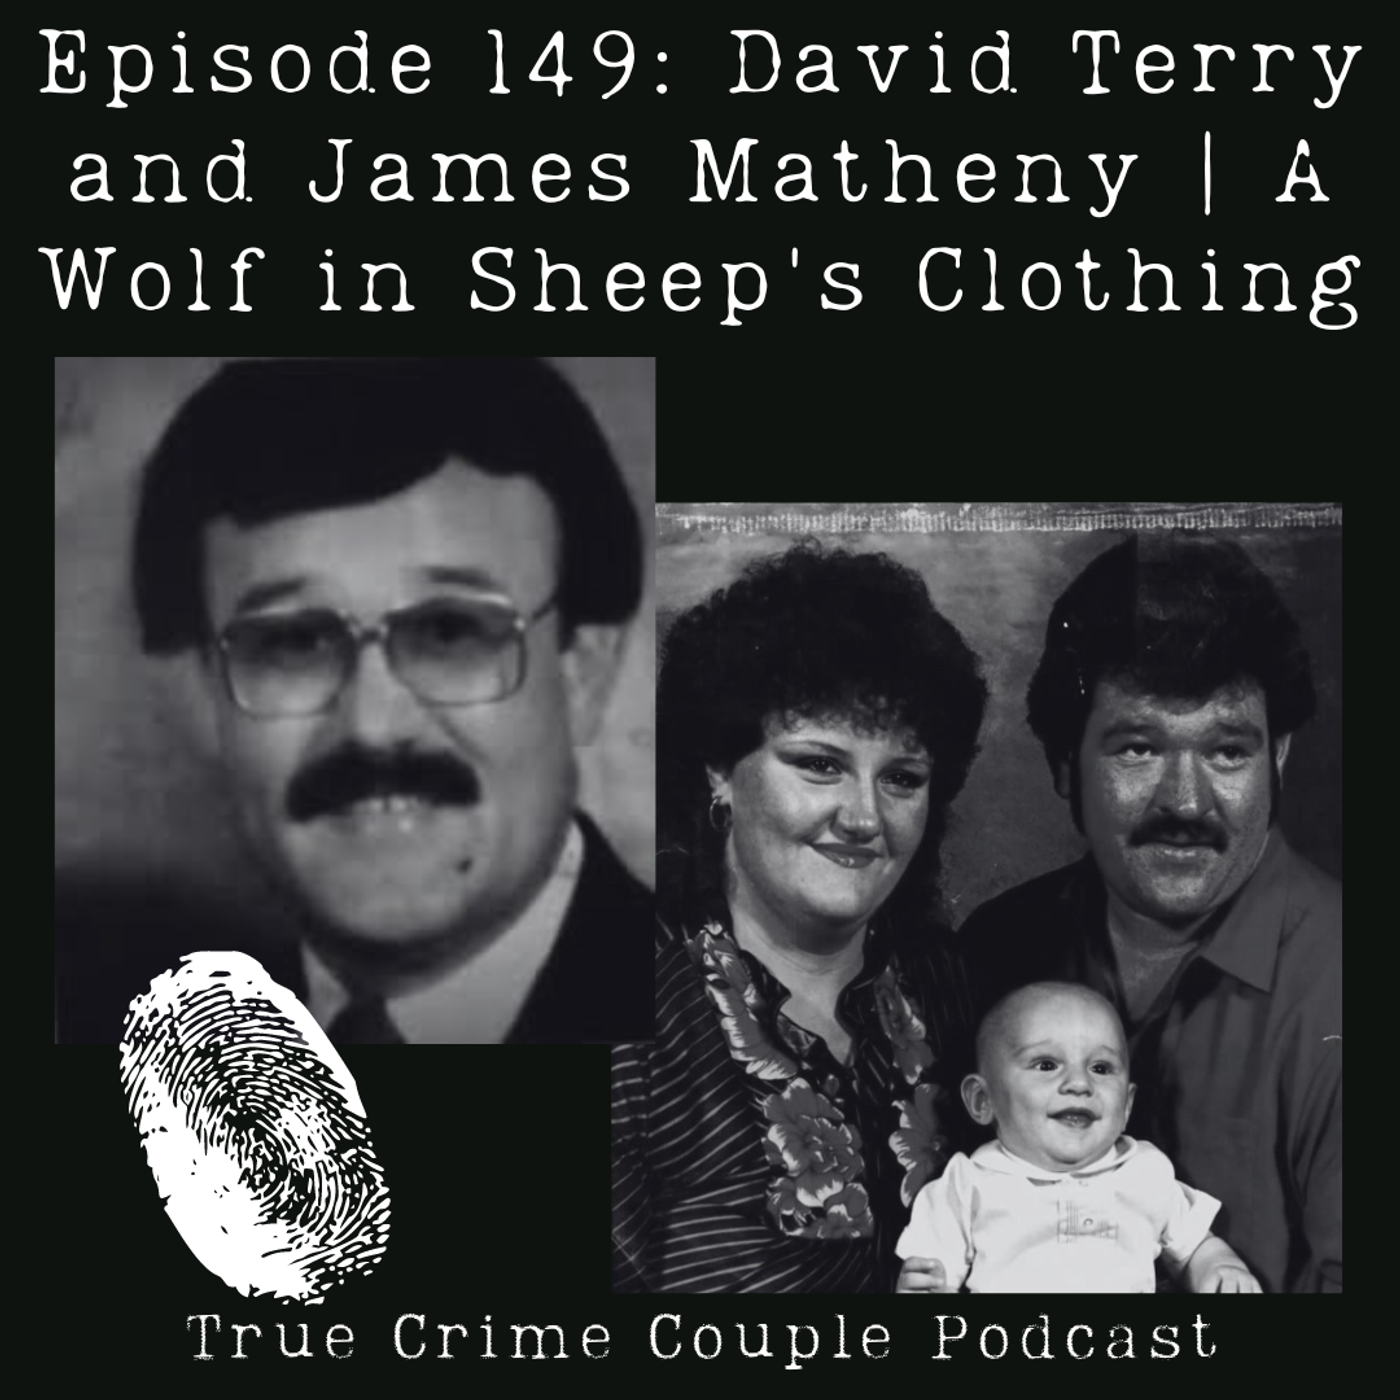 Episode 149: David Terry and James Matheny | A Wolf in Sheep's Clothing